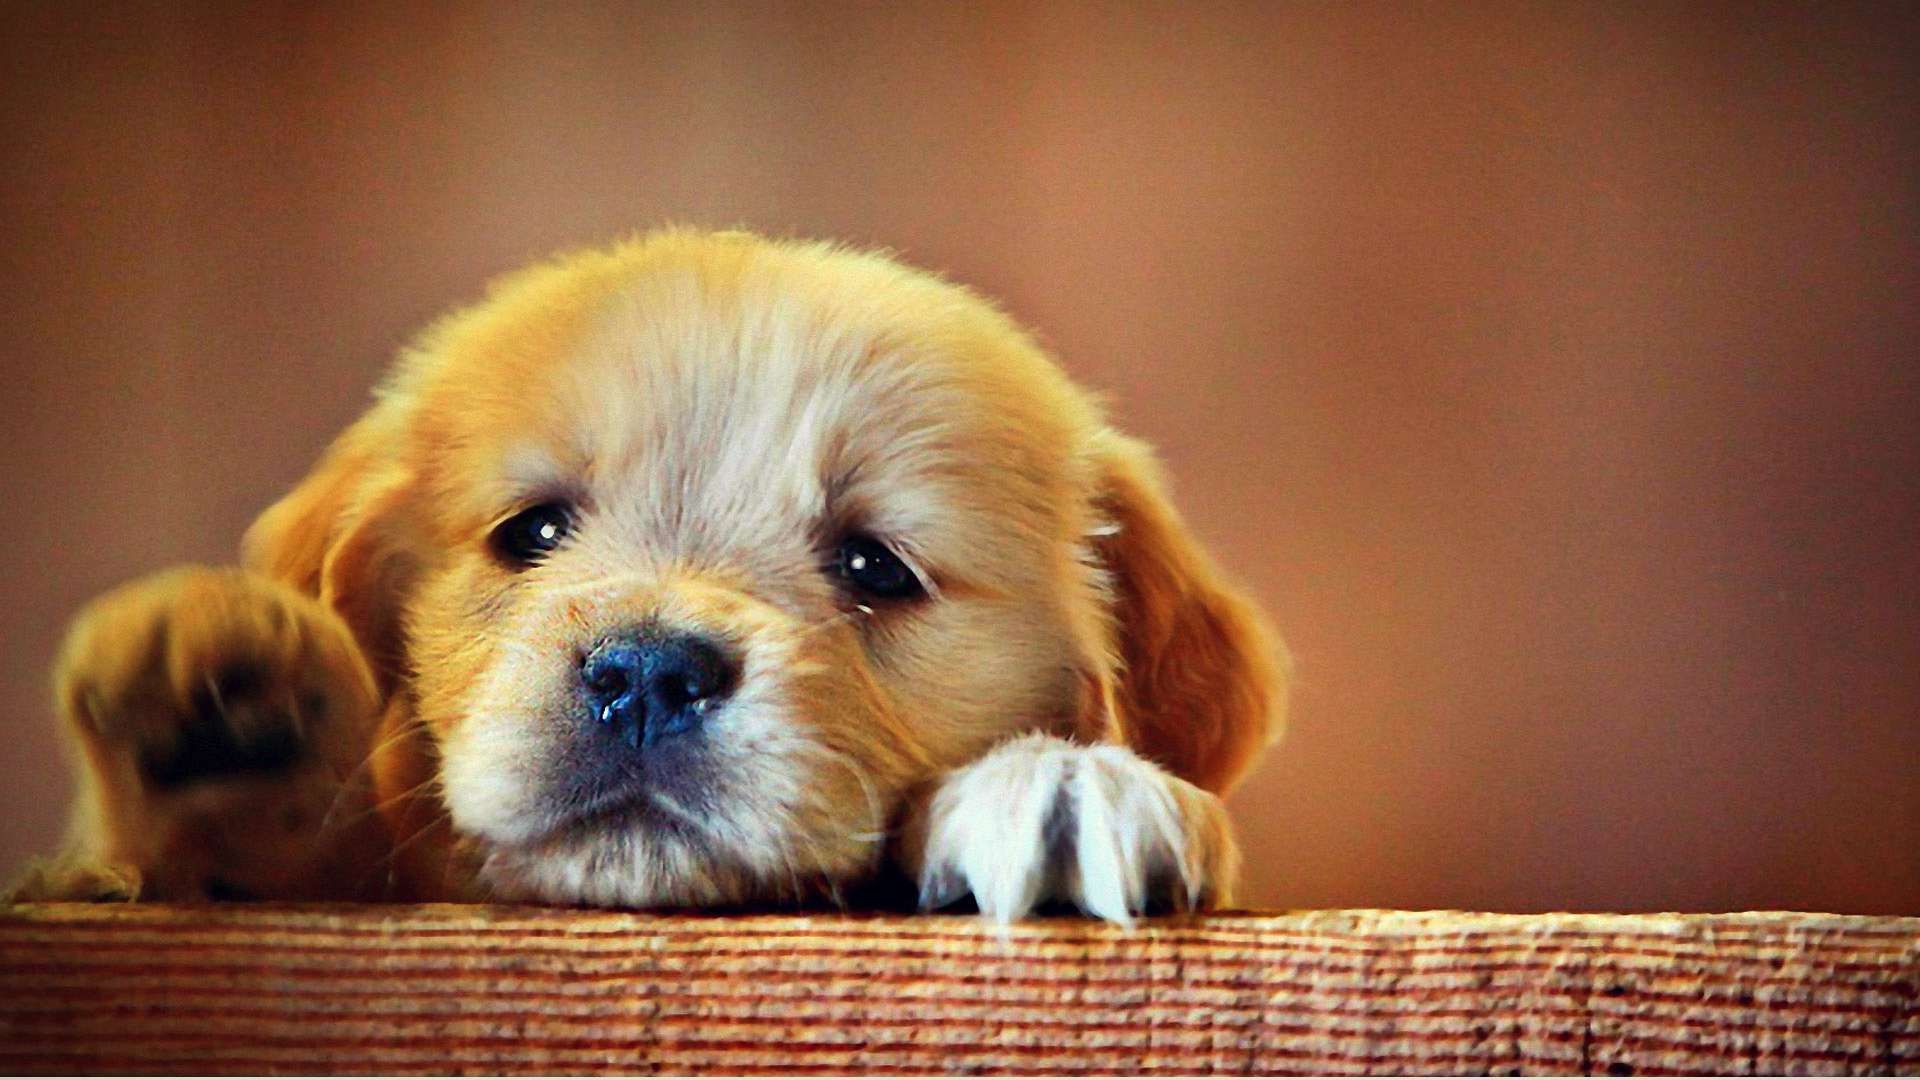 Cute Sad Puppy Wallpapers on WallpaperDog